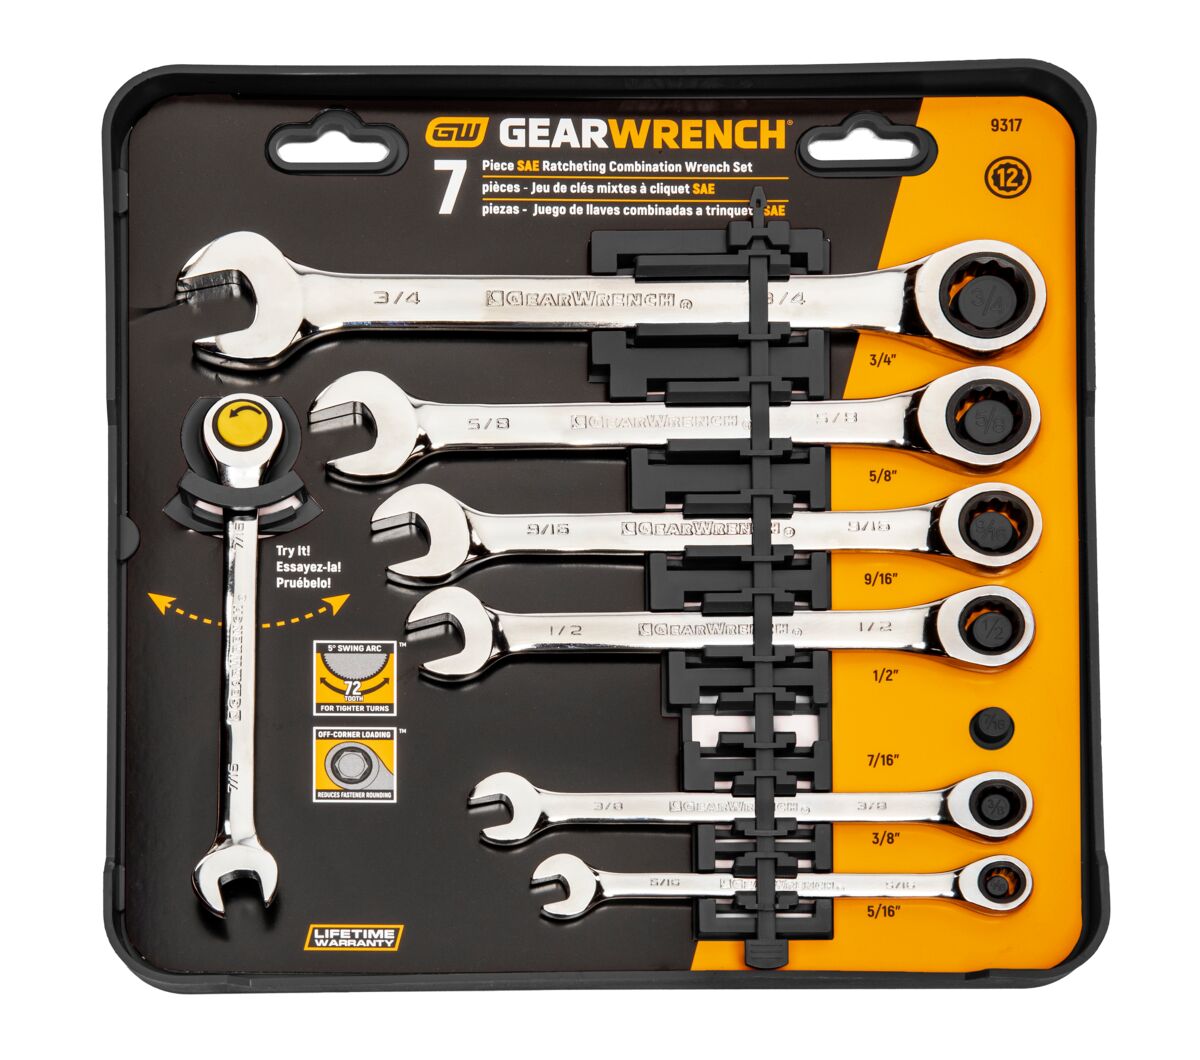 Gearwrench 7 Piece SAE Combination Ratcheting Wrench Set